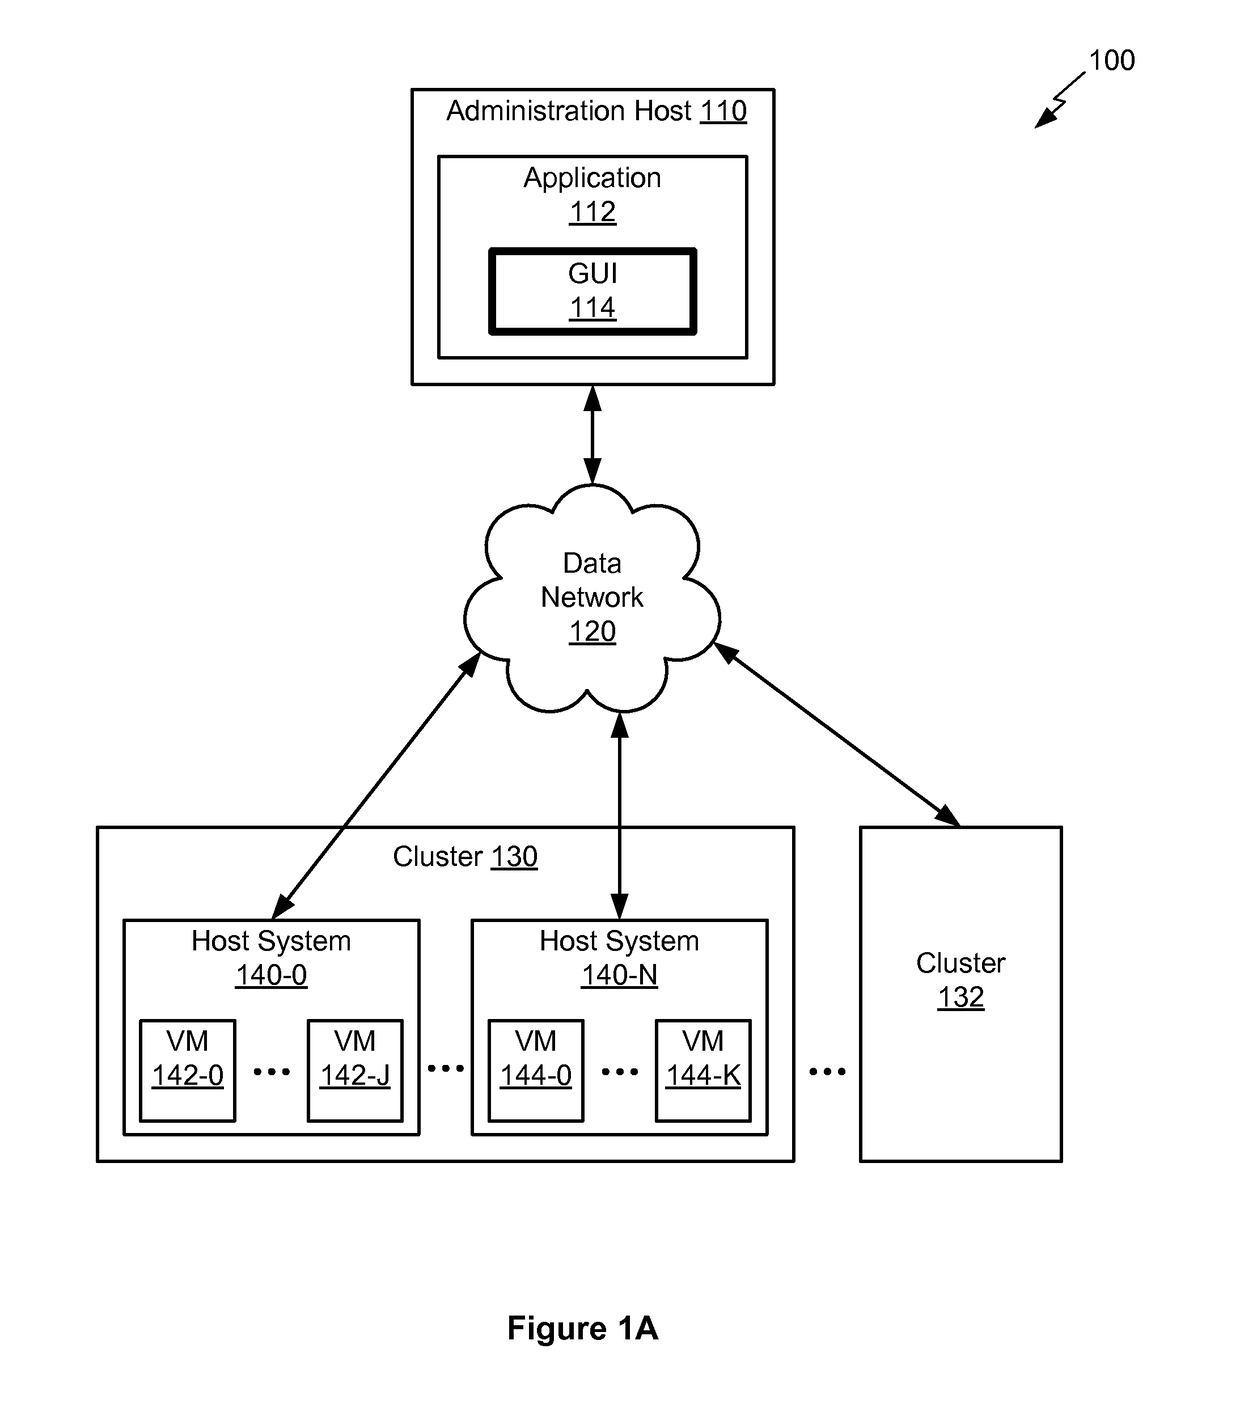 Graphical user interface for managing virtual machines